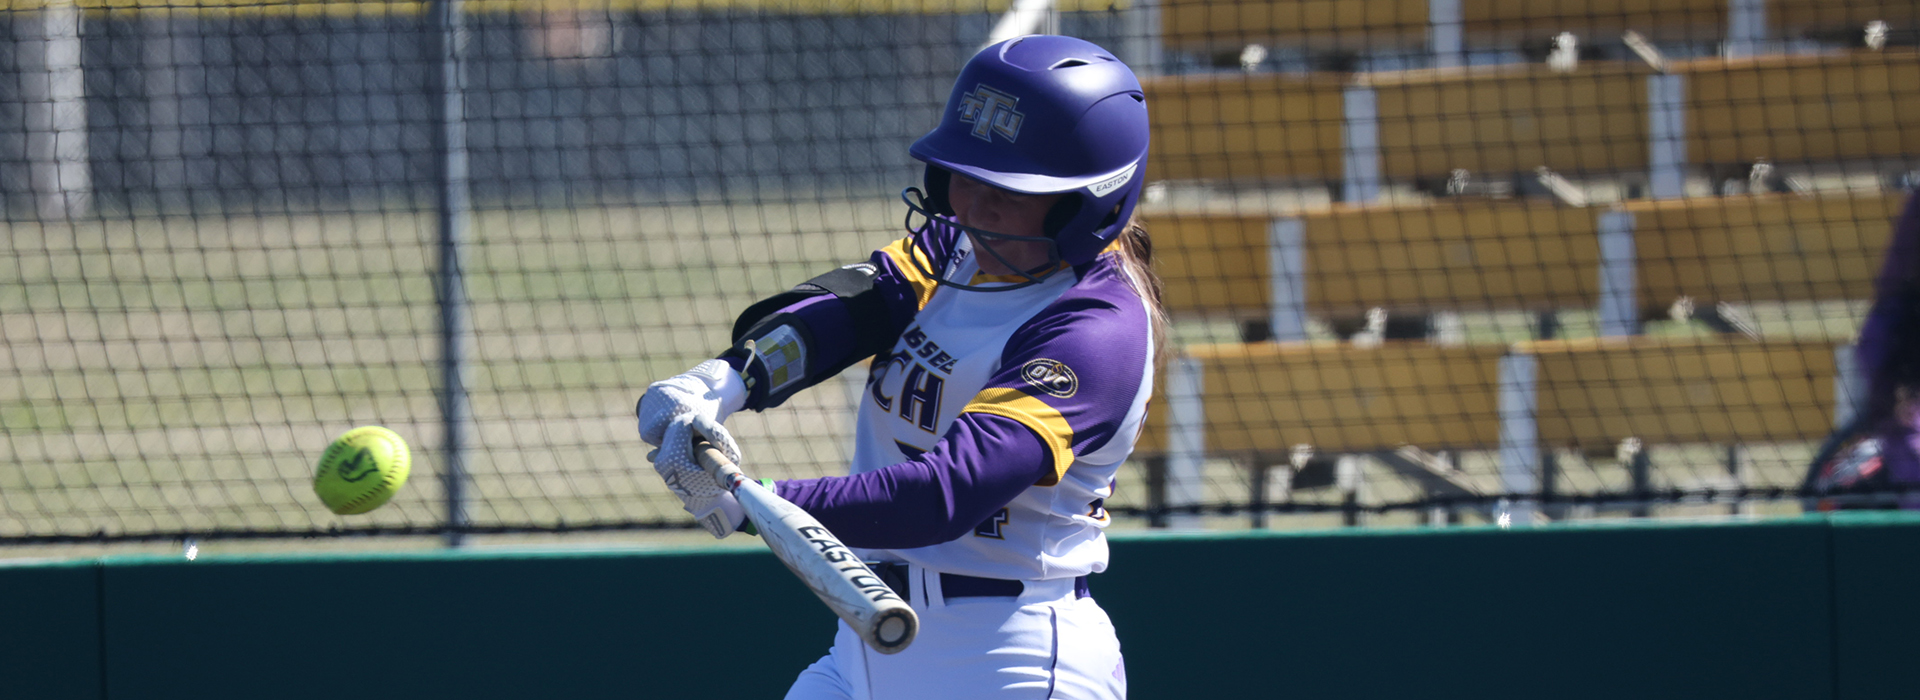 Tech Softball heads to ETSU for midweek contest Wednesday